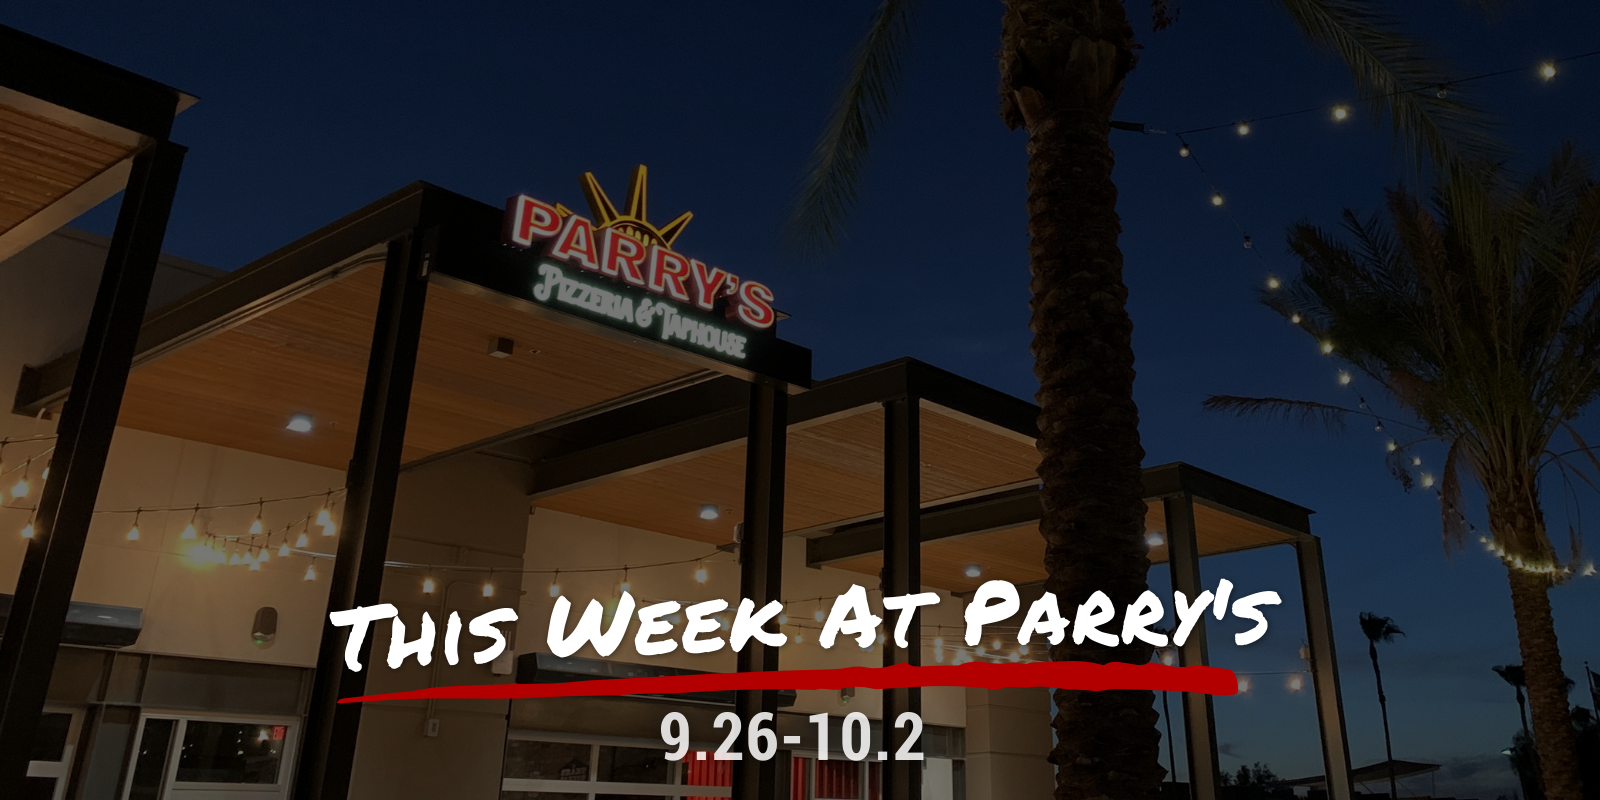 This Week at Parry's 9.26-10.2